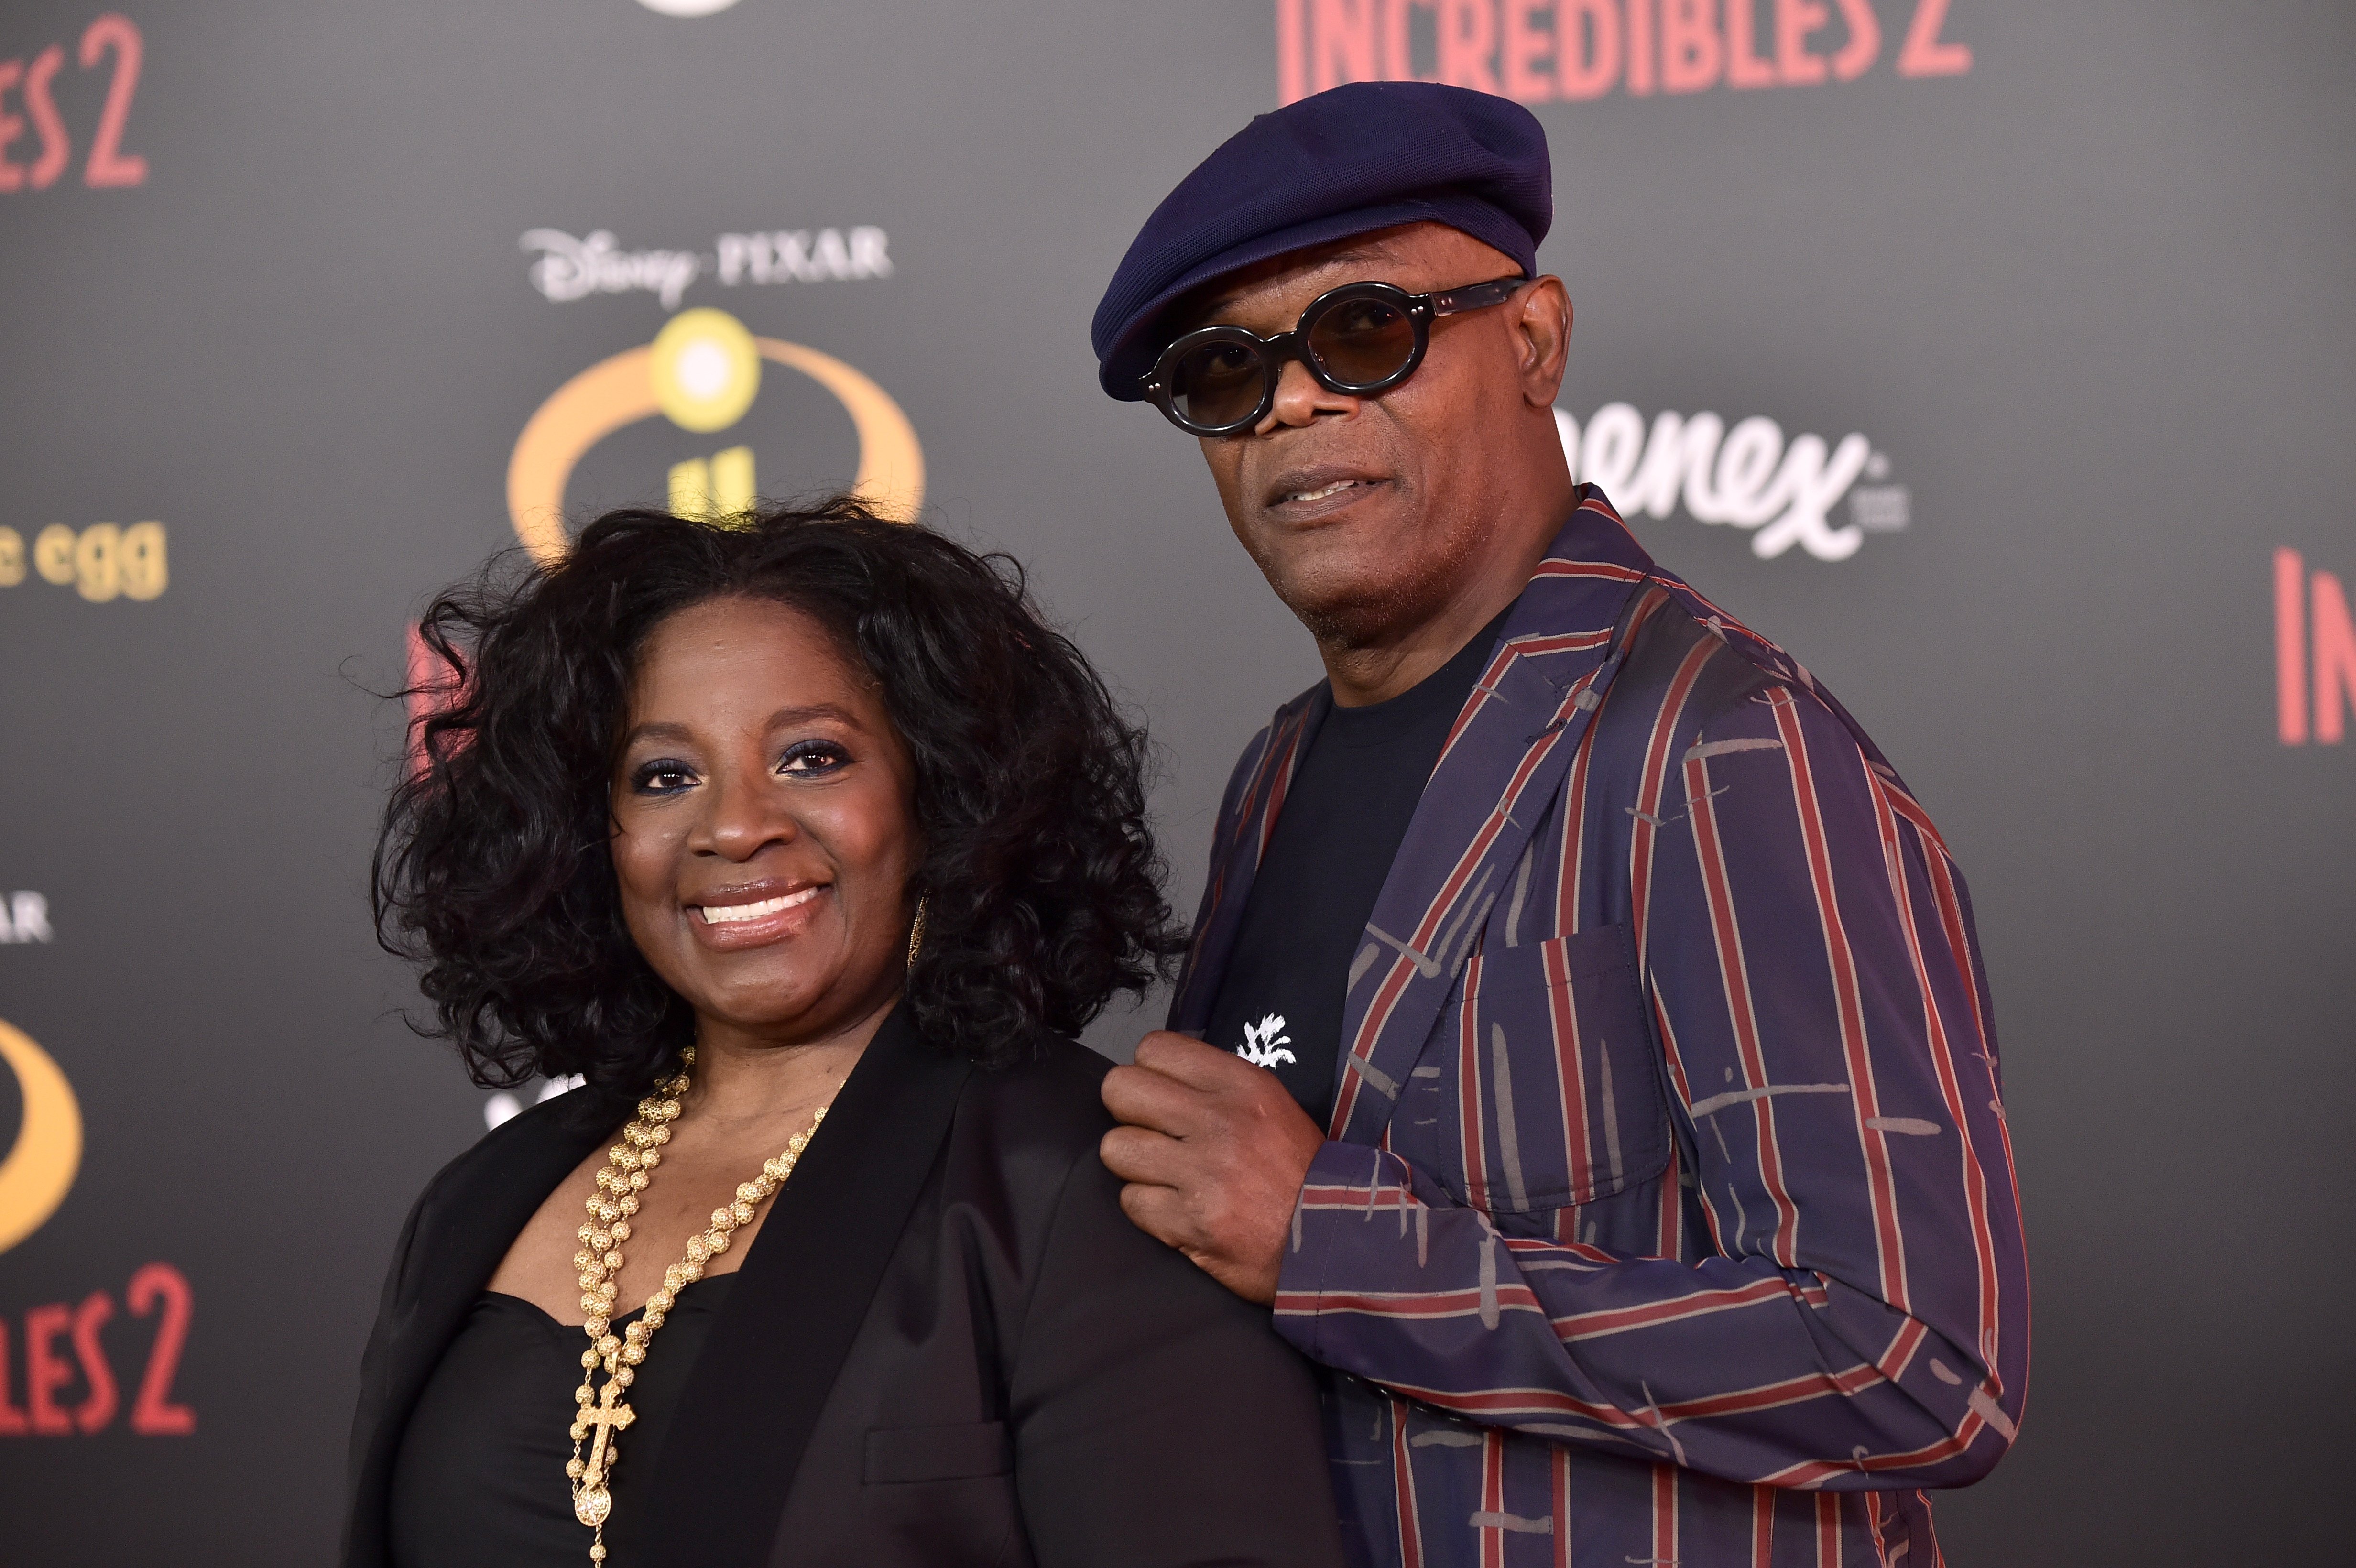 Samuel L. Jackson & LaTanya Richardson at the Premiere Of "Incredibles 2" on June 5, 2018 in Los Angeles, California | Photo: Getty Images